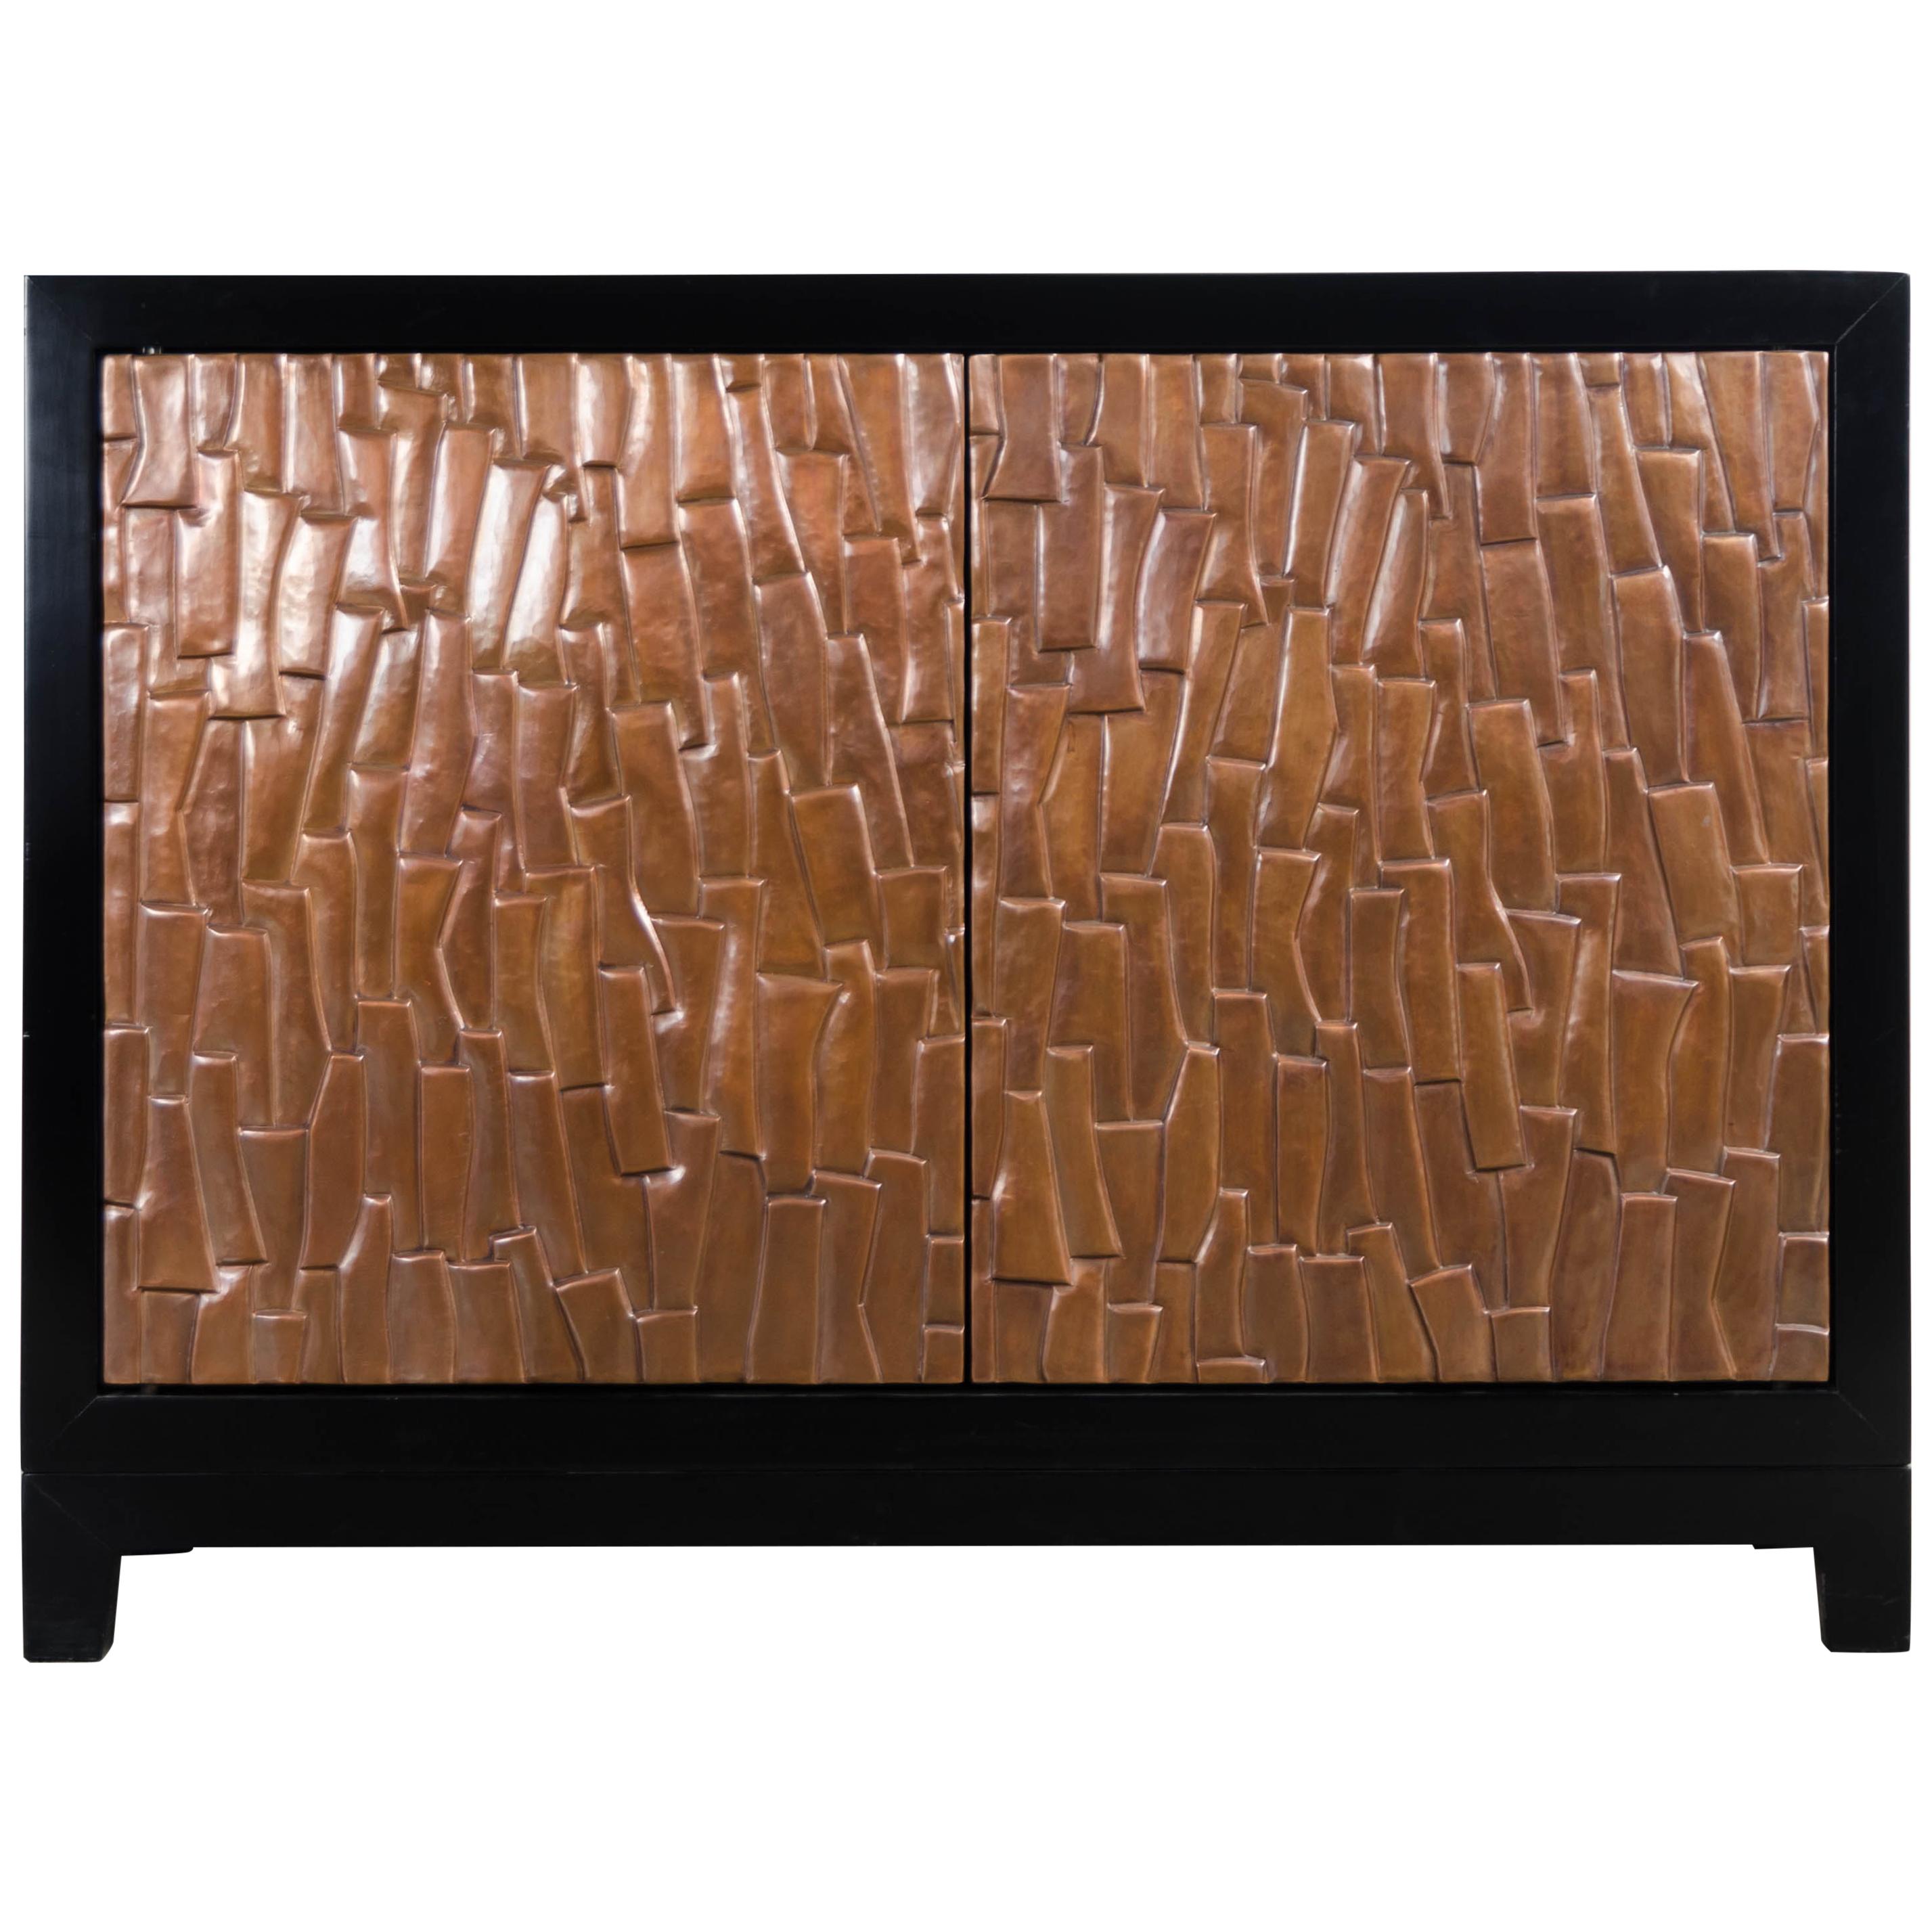 Kuai Design Cabinet on Stand, Copper by Robert Kuo, Hand Repousse, Limited